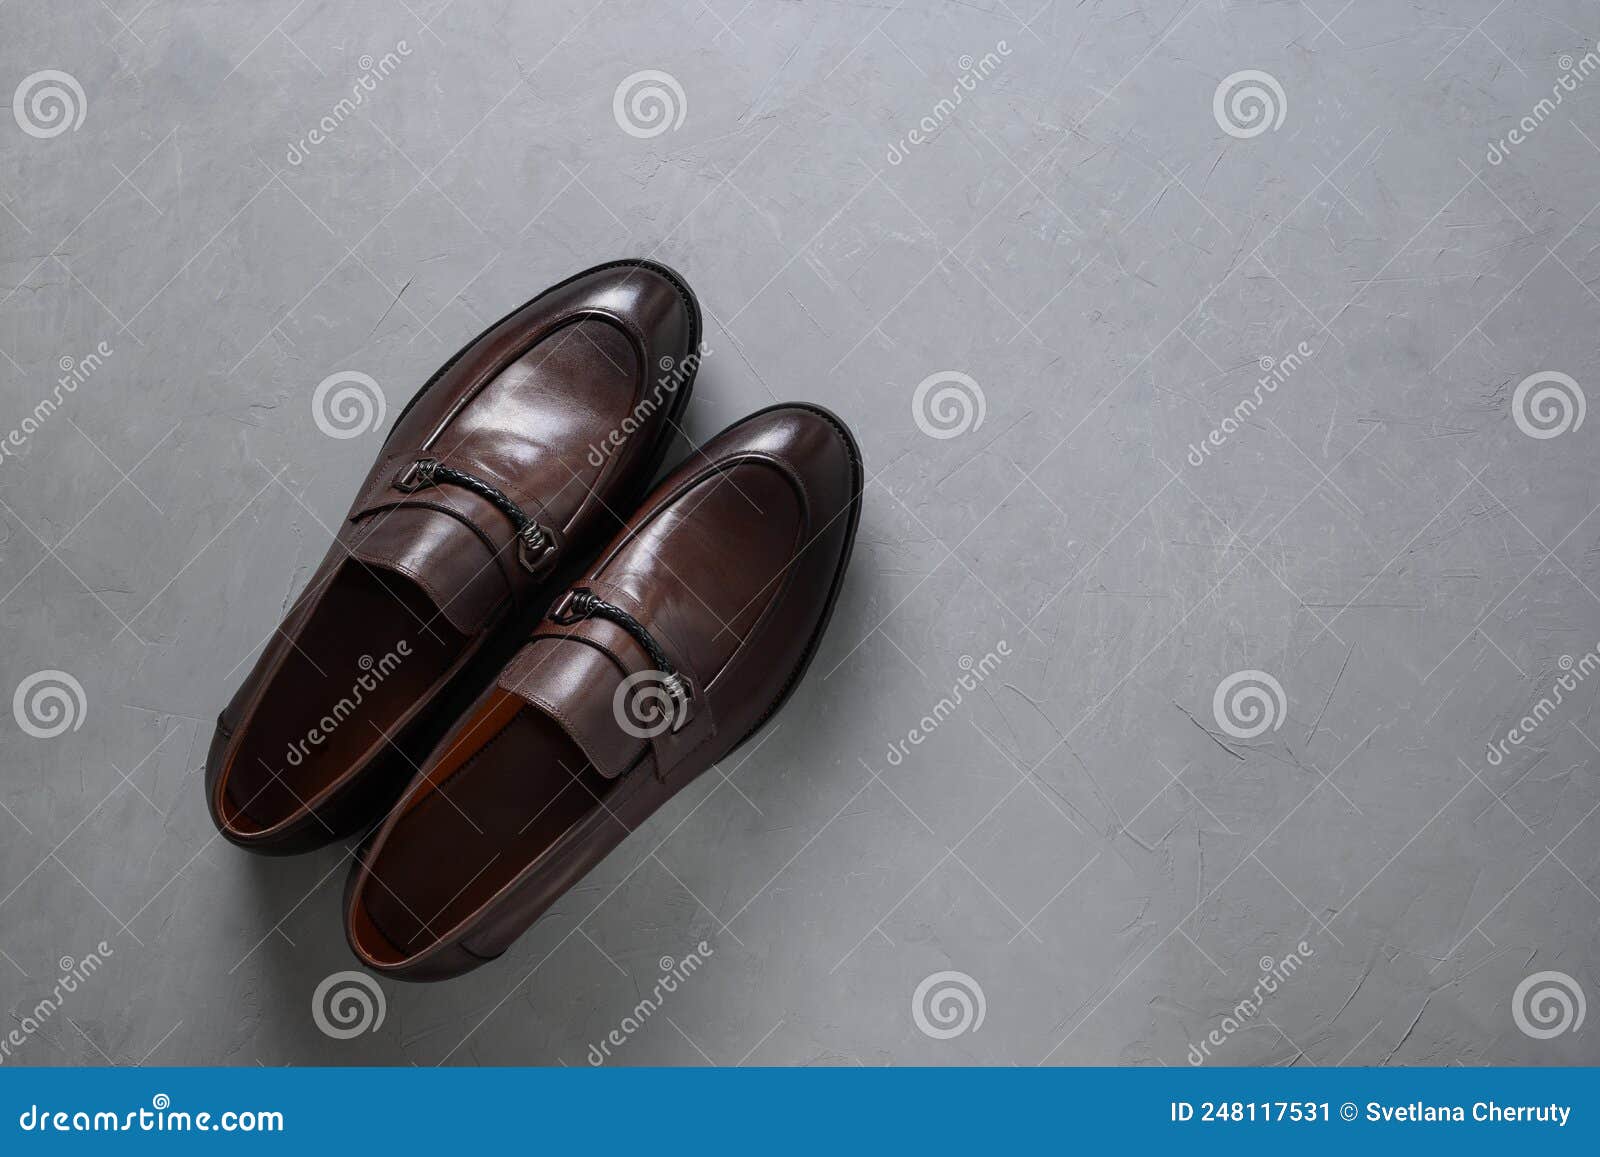 Classic Male Brown Leather Shoes. Top View. Flat Lay. Stock Image ...